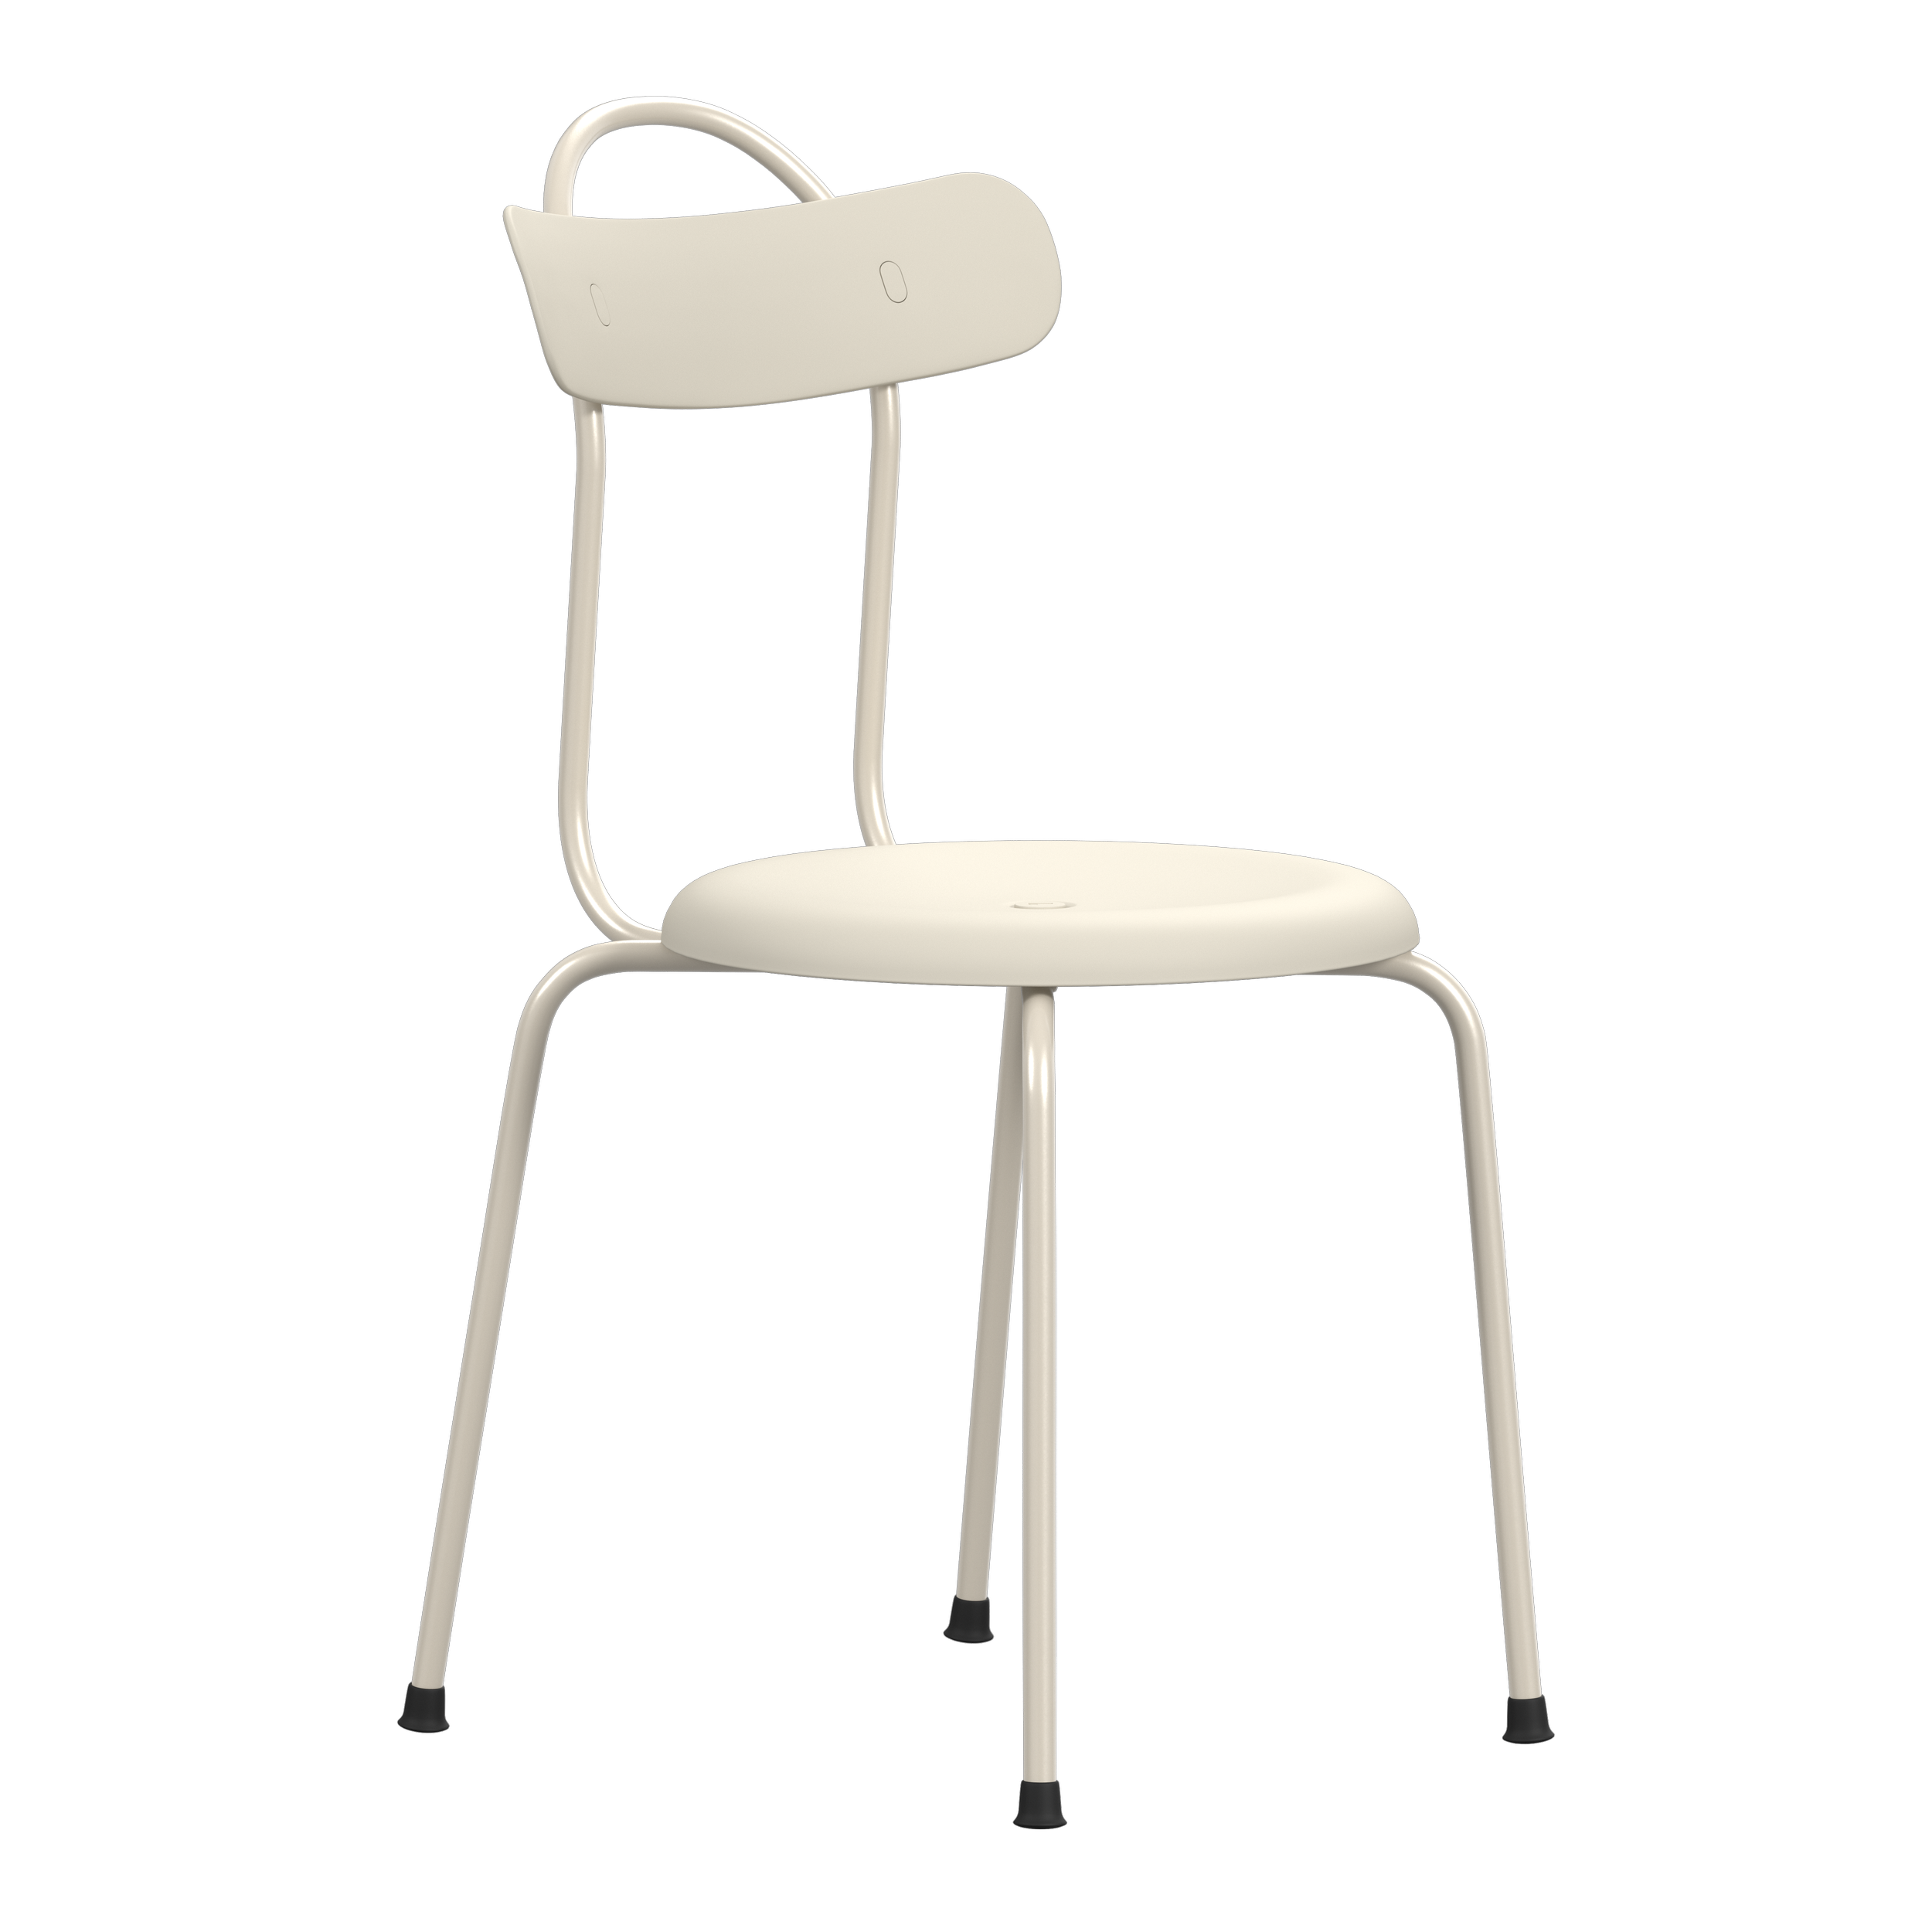 Lammhults_TaburettPlus_chair_beige_beige_frontangle.png